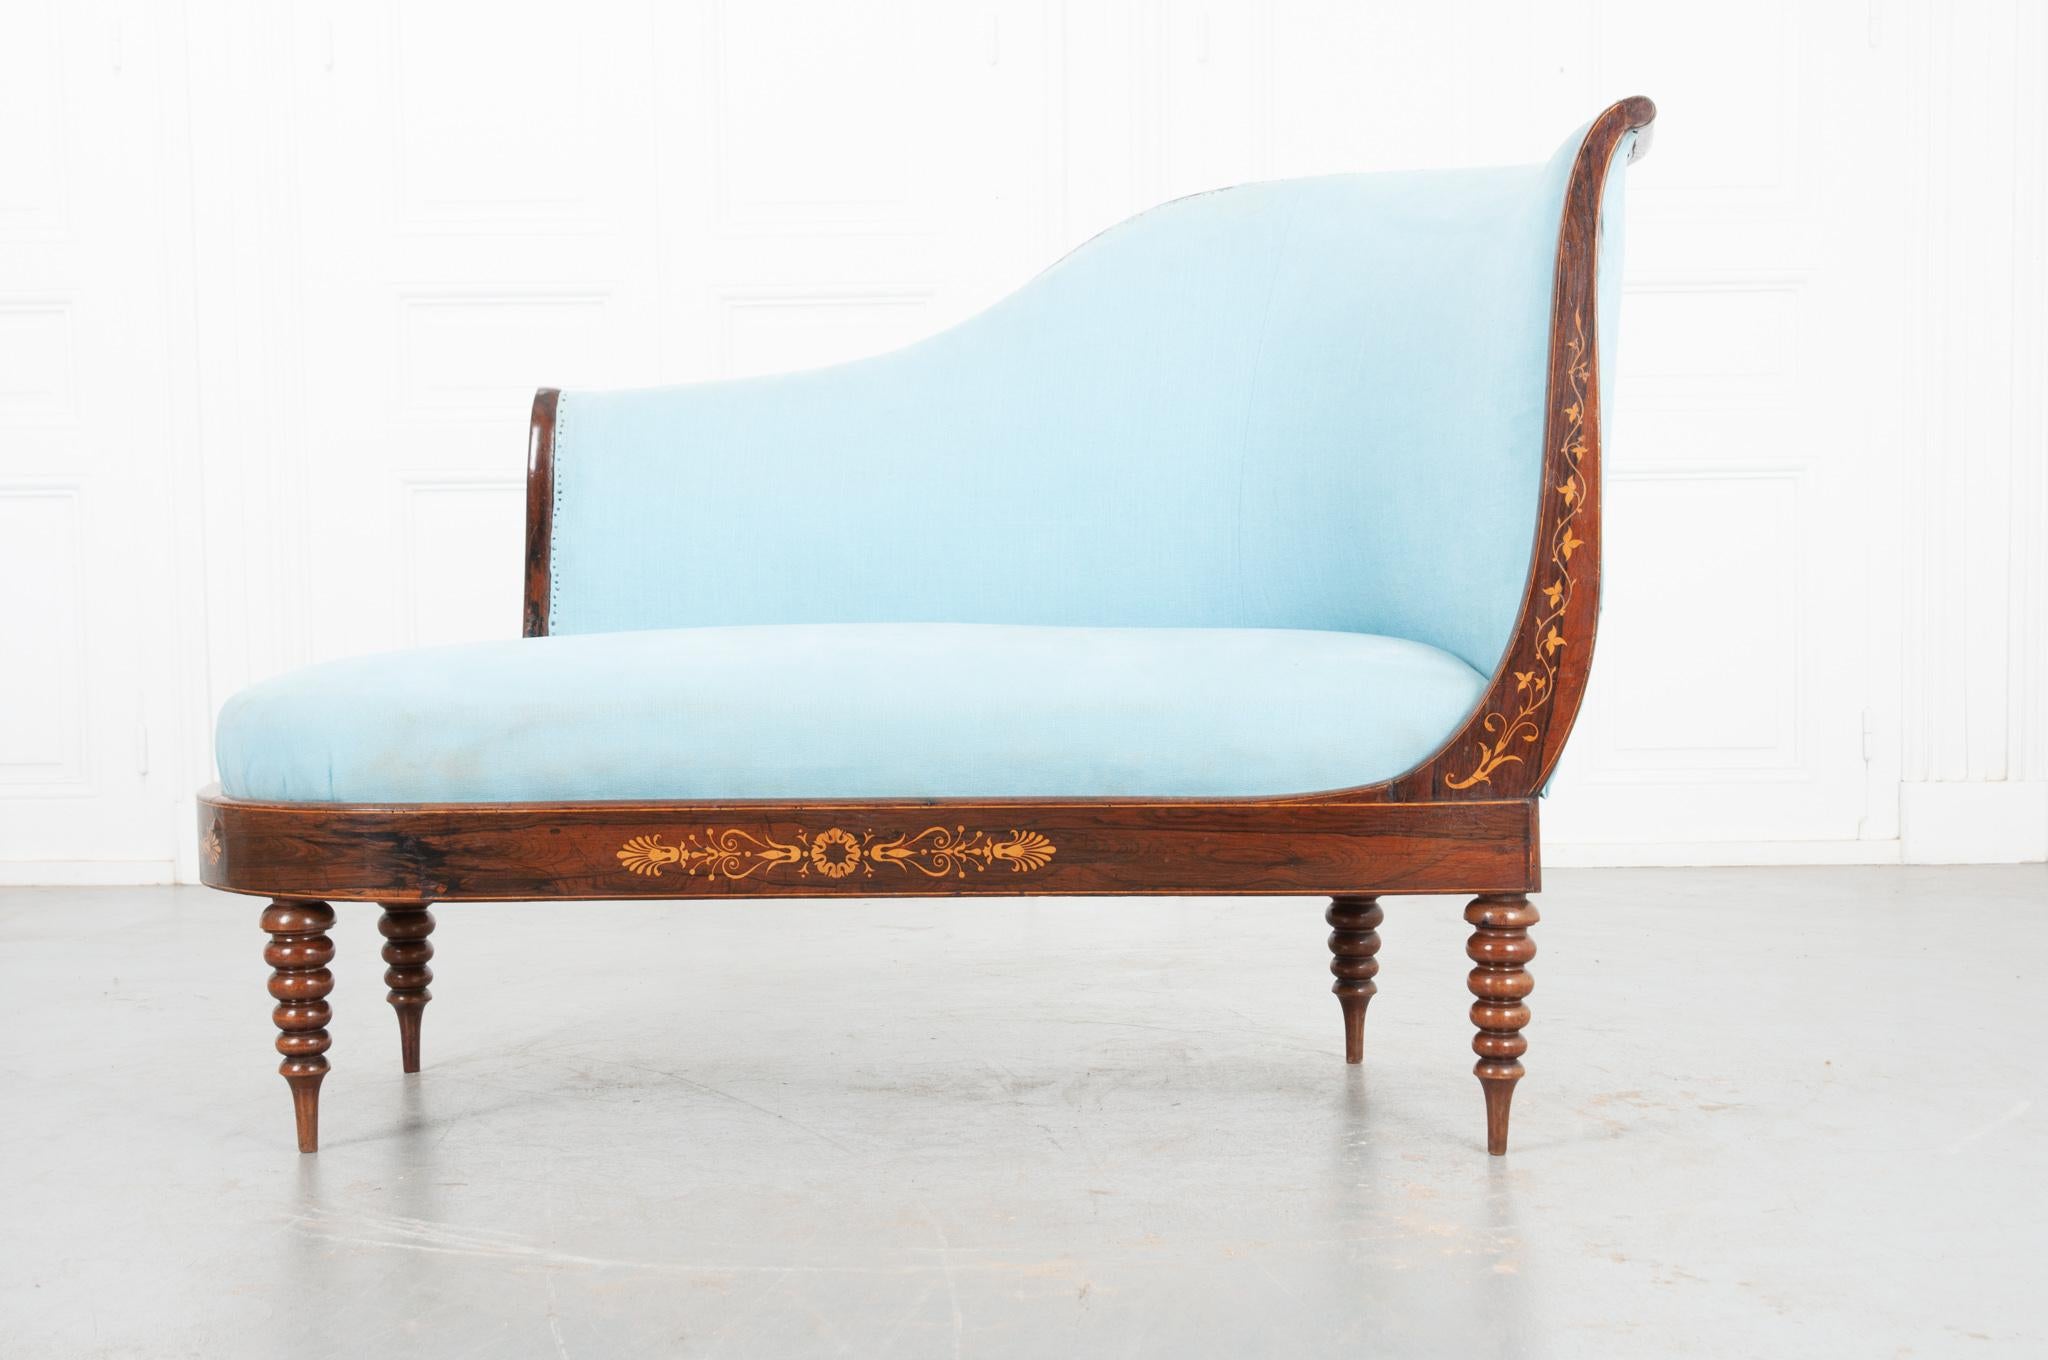 This elegant settee is upholstered with a stunning blue fabric that brilliantly contrasts with the dark wood frame. The whole is supported by deeply turned legs and elevates the piece 10” from the ground. The curved apron has a beautiful floral